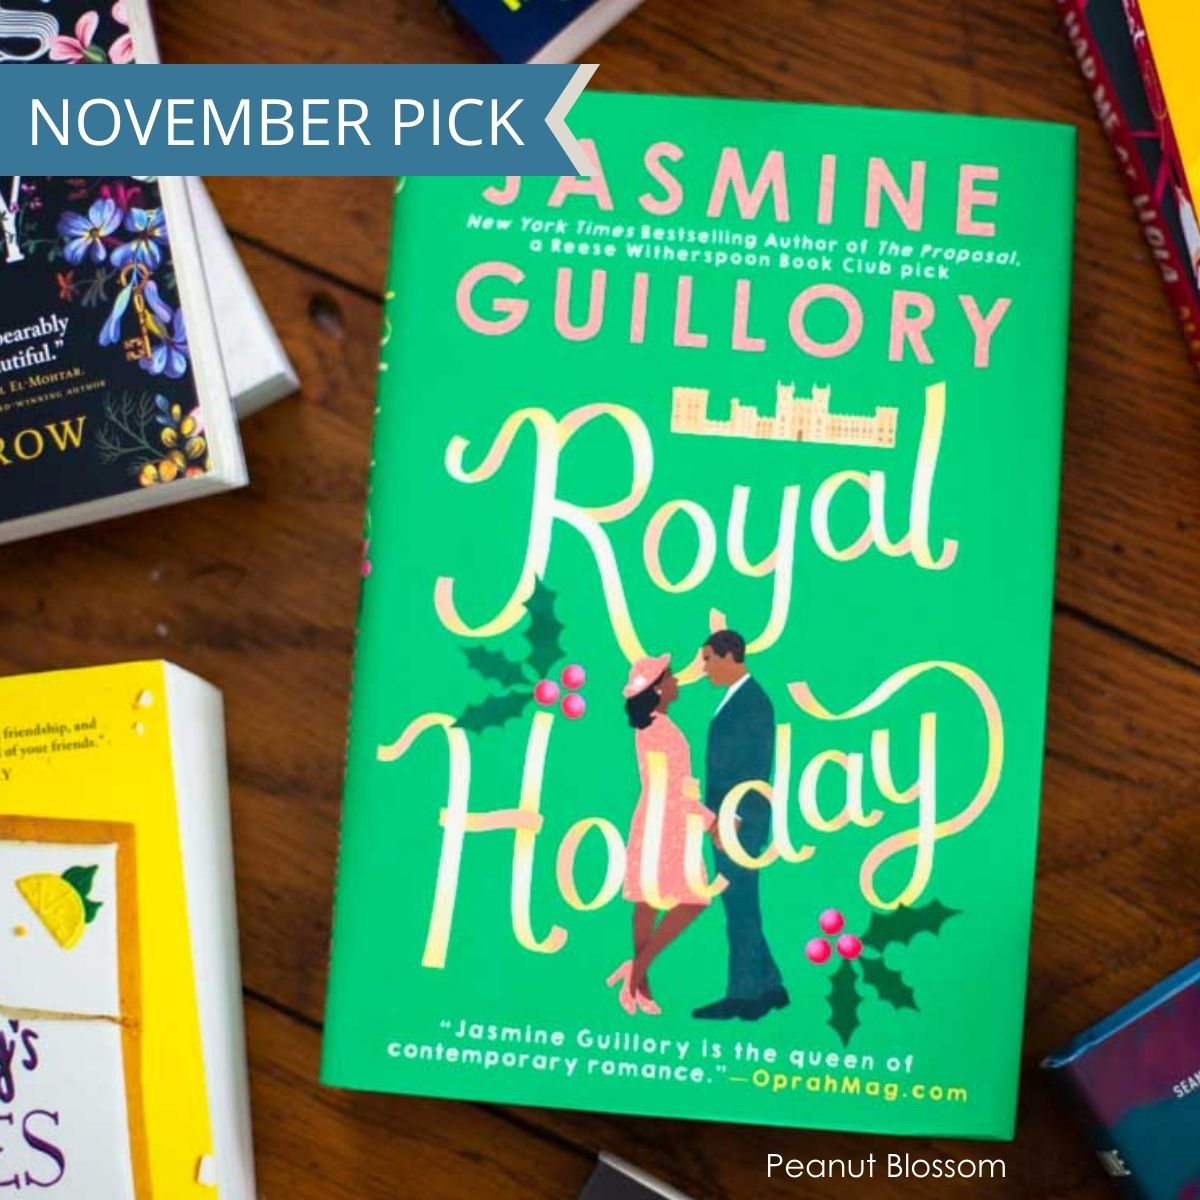 The book Royal Holiday by Jasmine Guillory sits on a table.